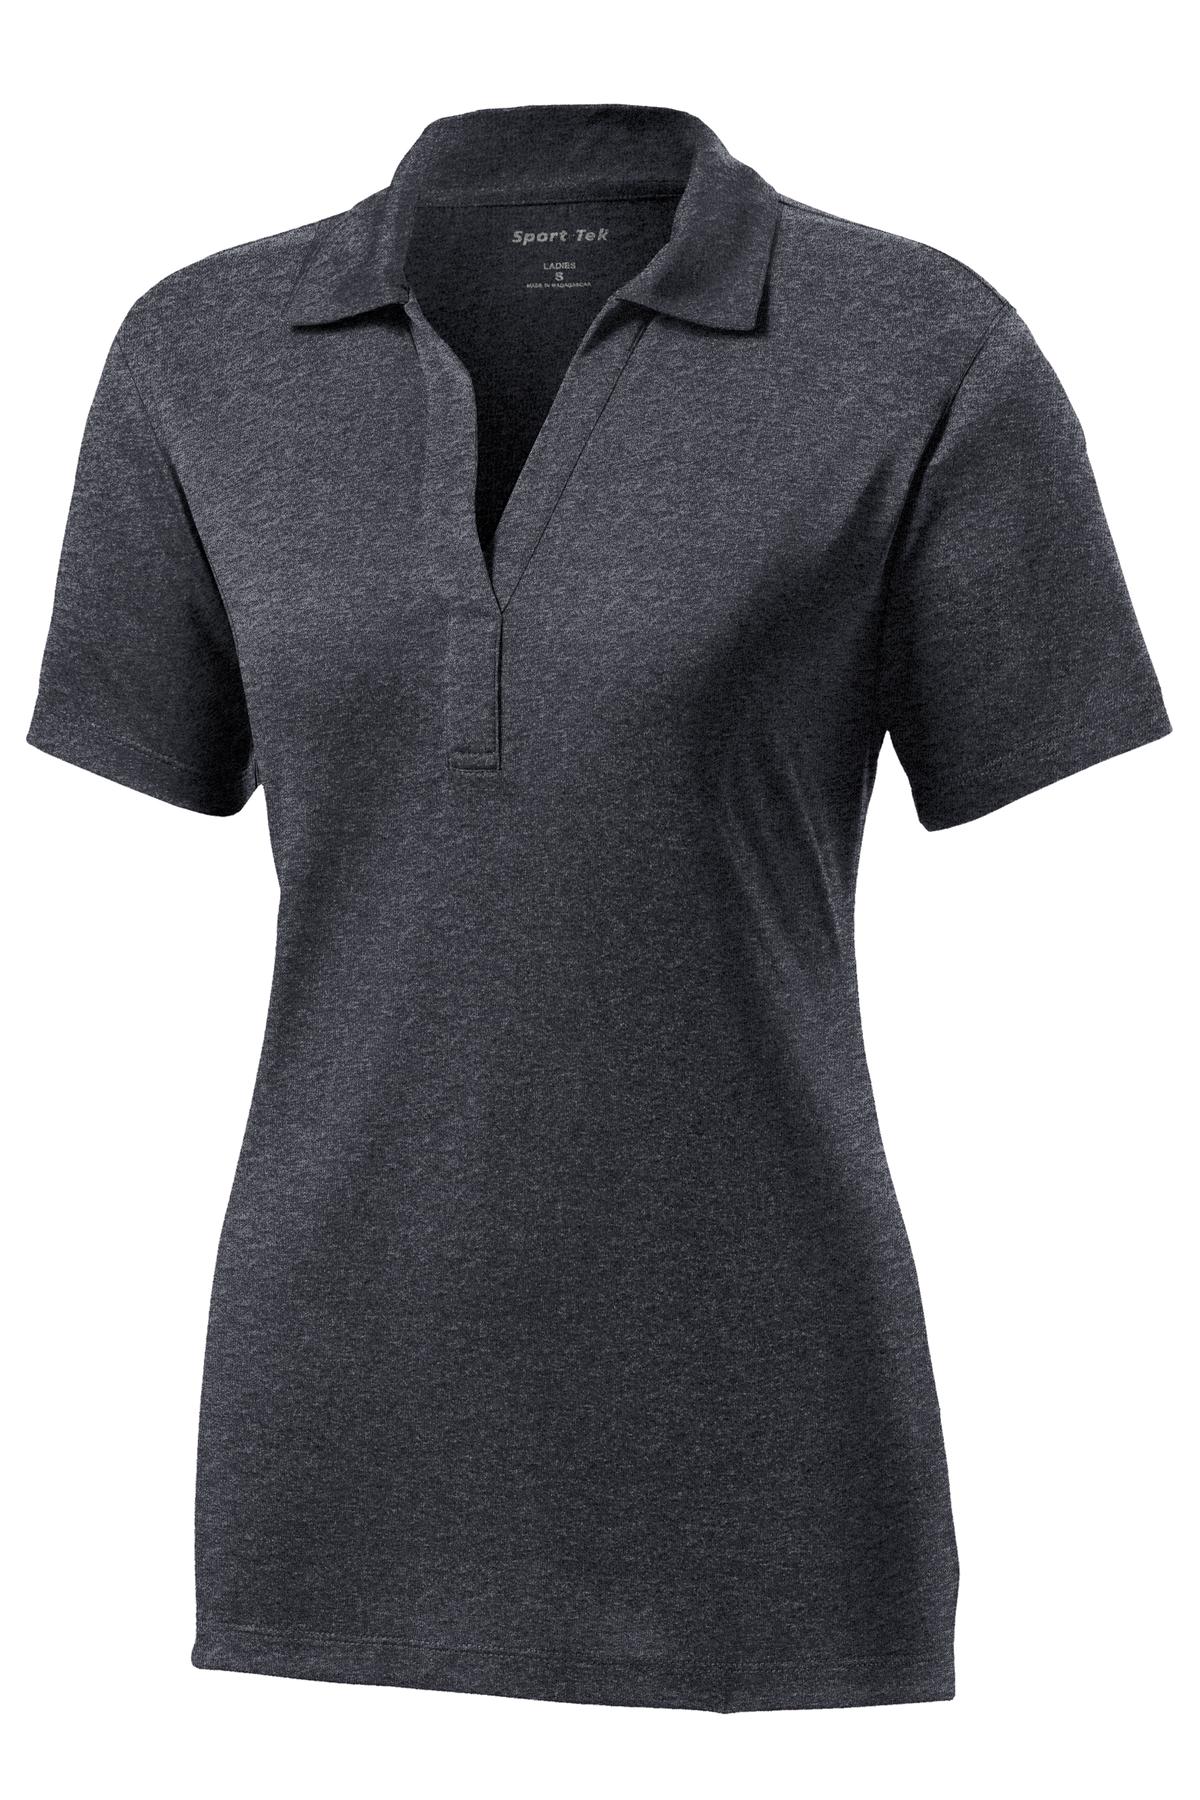 Embroidered Ladies Heather Contender Polo  LST660